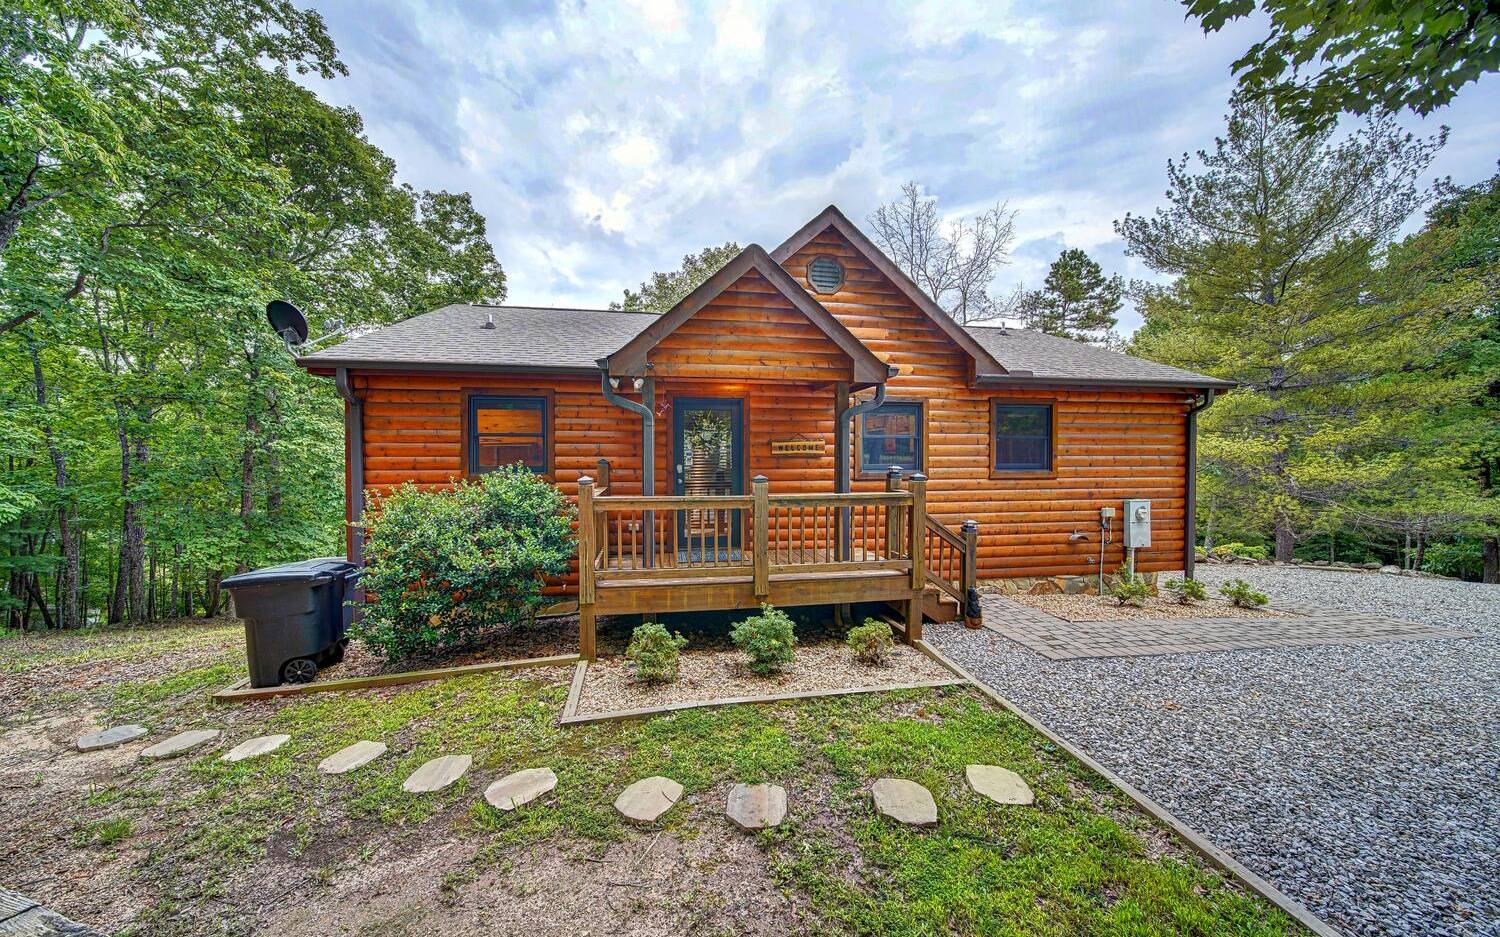 This 3BD/3.5BA cabin has been professionally decorated and is Turn-Key. Current Vacation Cabin Rental/Part time Owner Residence. Easy access on paved roads and located conveniently between Blue Ridge and Blairsville. The cabin has whole house water filter system, large designer hot tub and security cameras. Main level has large kitchen and dining area, partial bath in oversized laundry, living room w/stacked stone fireplace and split master bedrooms. Finished Basement with Family Room, Bedroom/Full Bath and Workshop/Storage area. Full-width porches with matching Terrace level walk out hot-tub deck beneath.. Property has been landscaped and has level parking for several cars. All this PLUS a Seasonal Mountain View! New HVAC & Hot Tub.